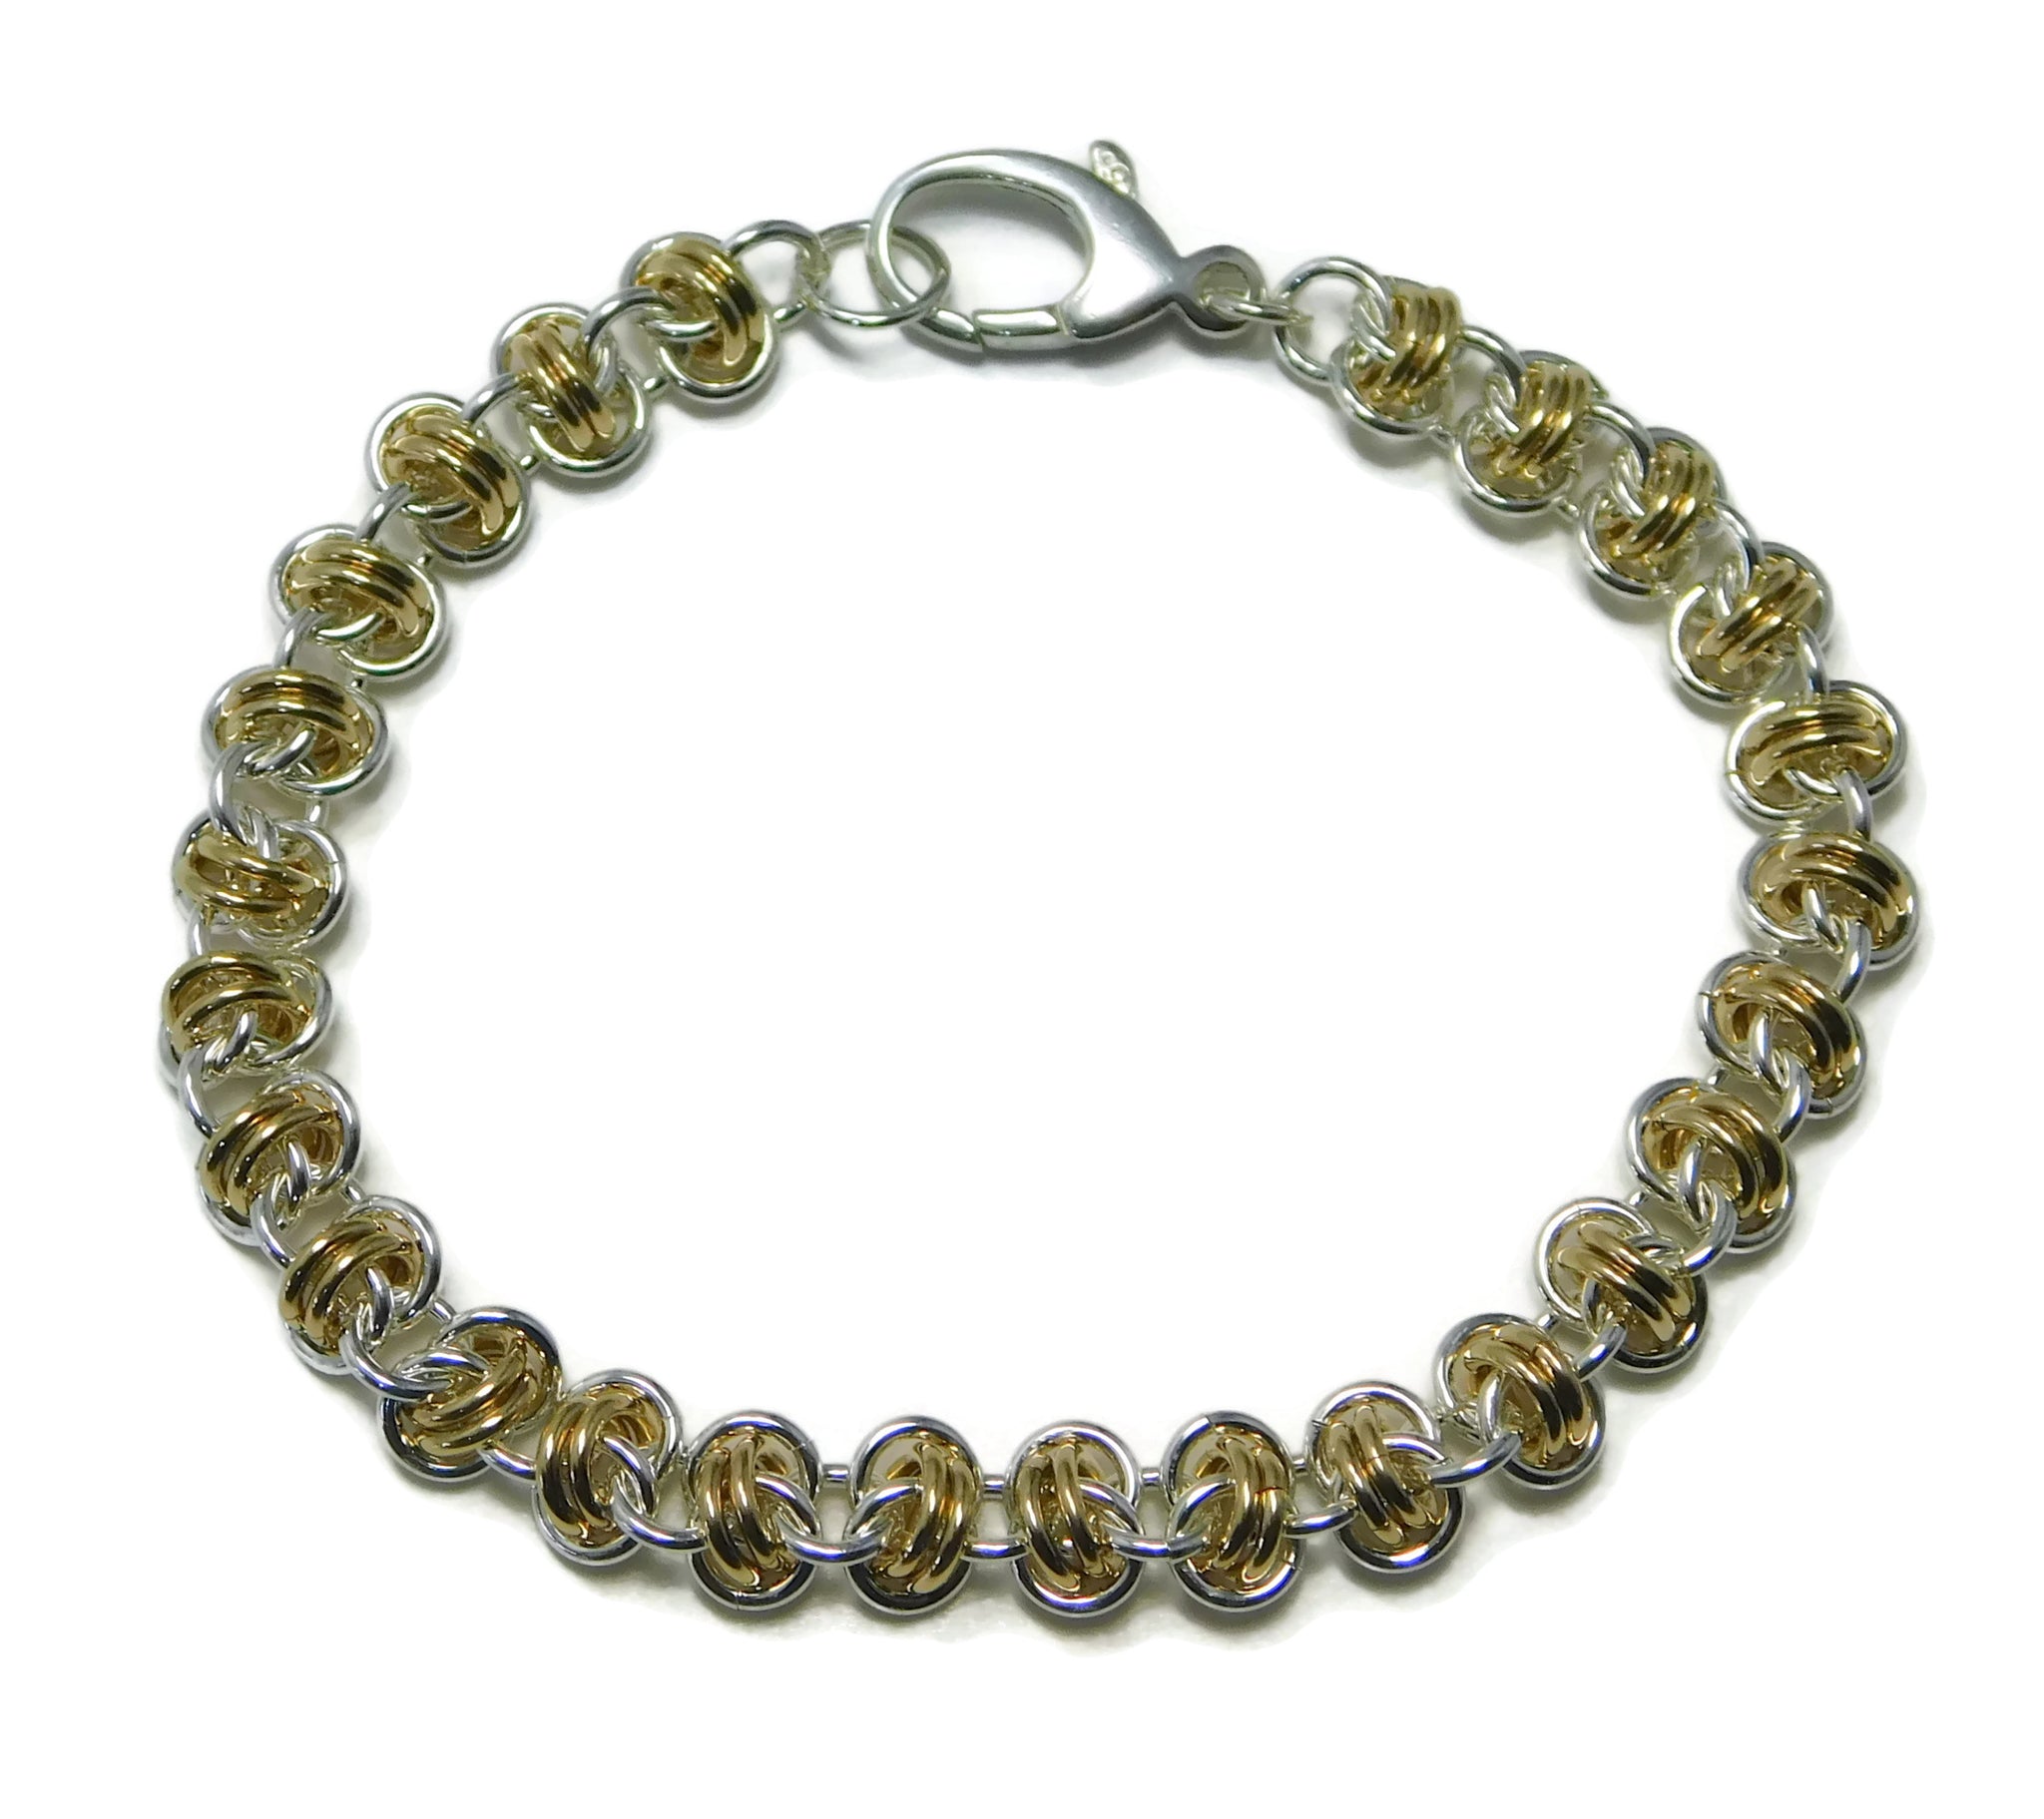 Sterling Silver and 14kt Gold Fill Barrel Weave Chainmaille Bracelet